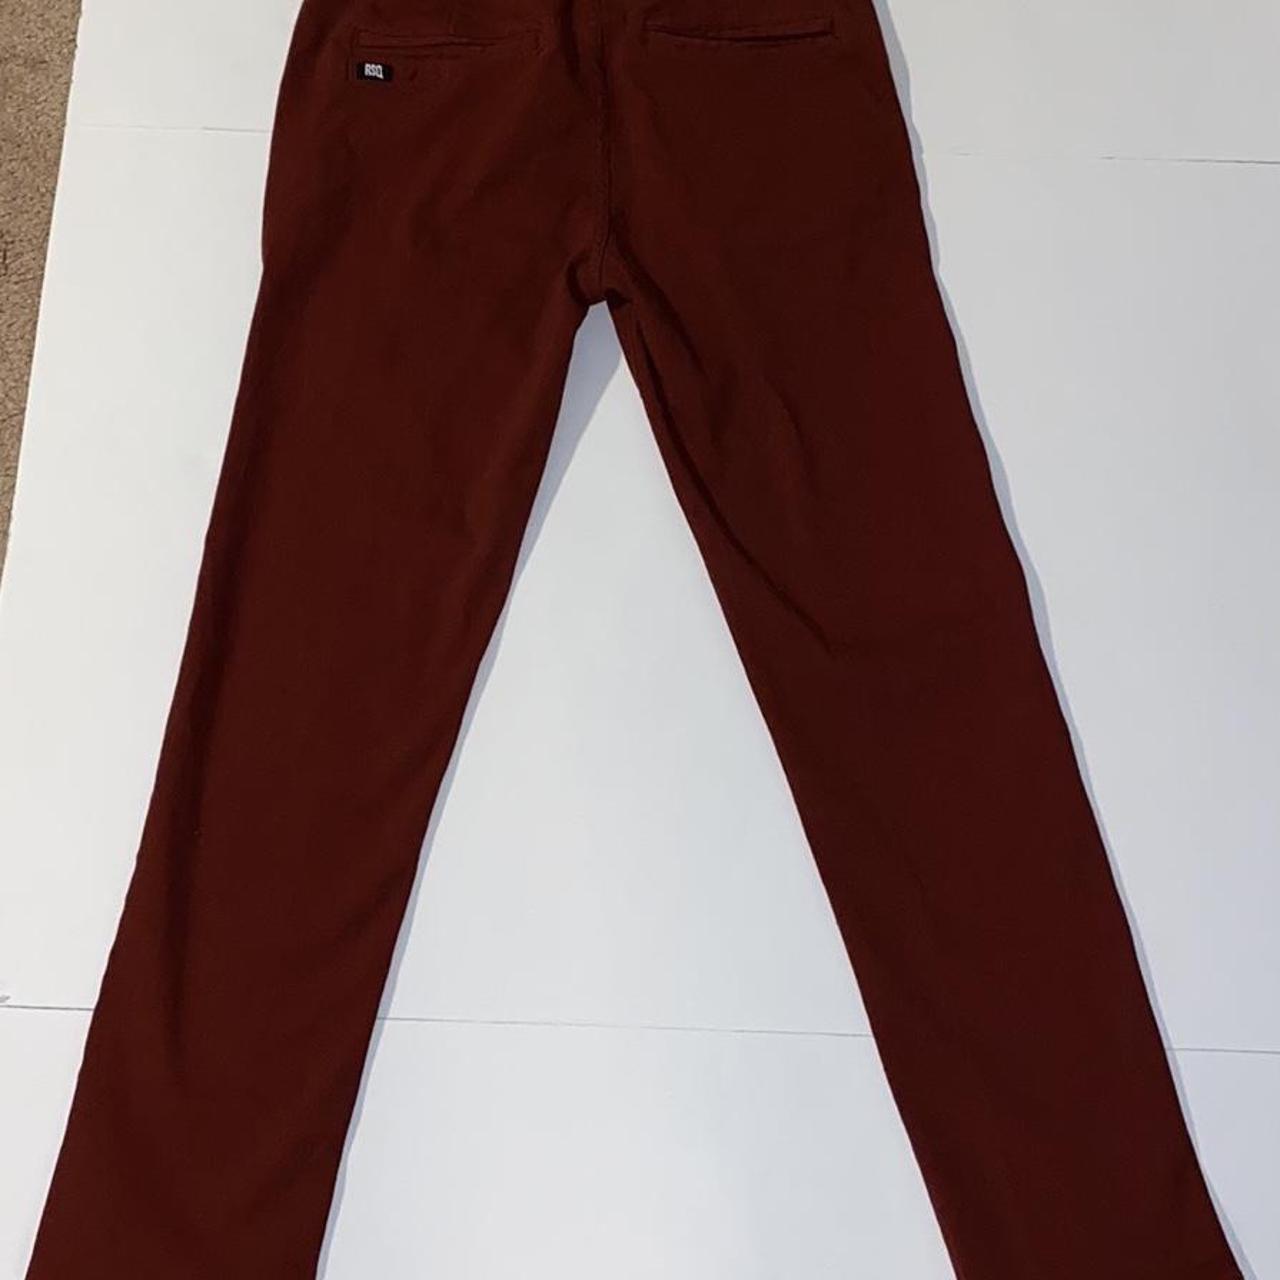 Product Image 3 - RSQ Men’s London Skinny Chinos

Burnt